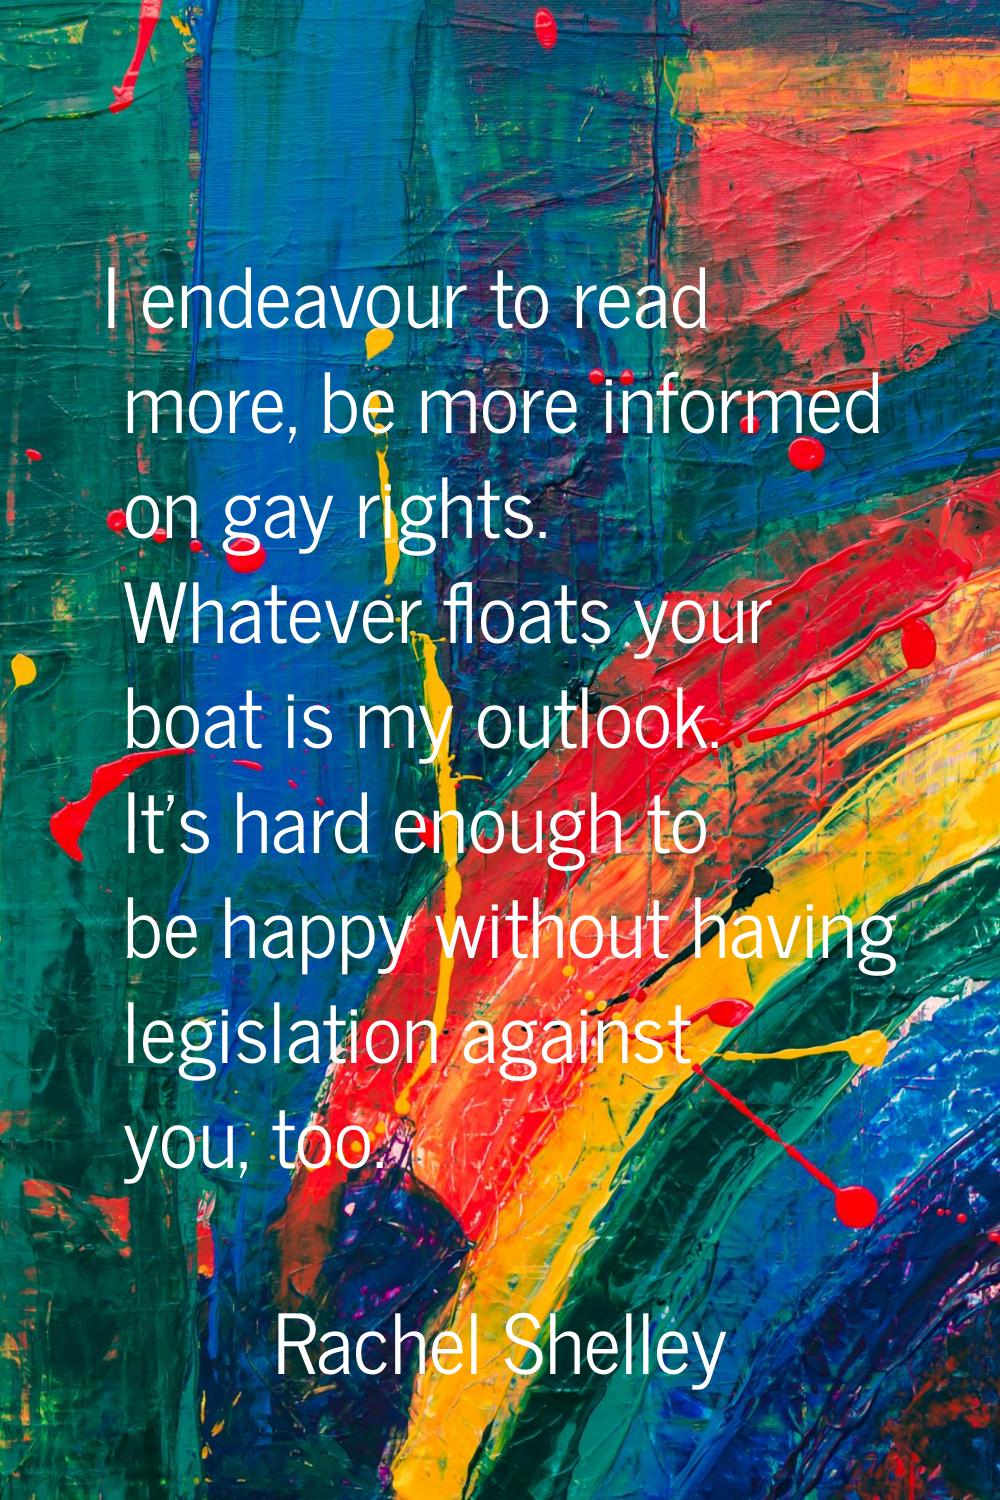 I endeavour to read more, be more informed on gay rights. Whatever floats your boat is my outlook. 